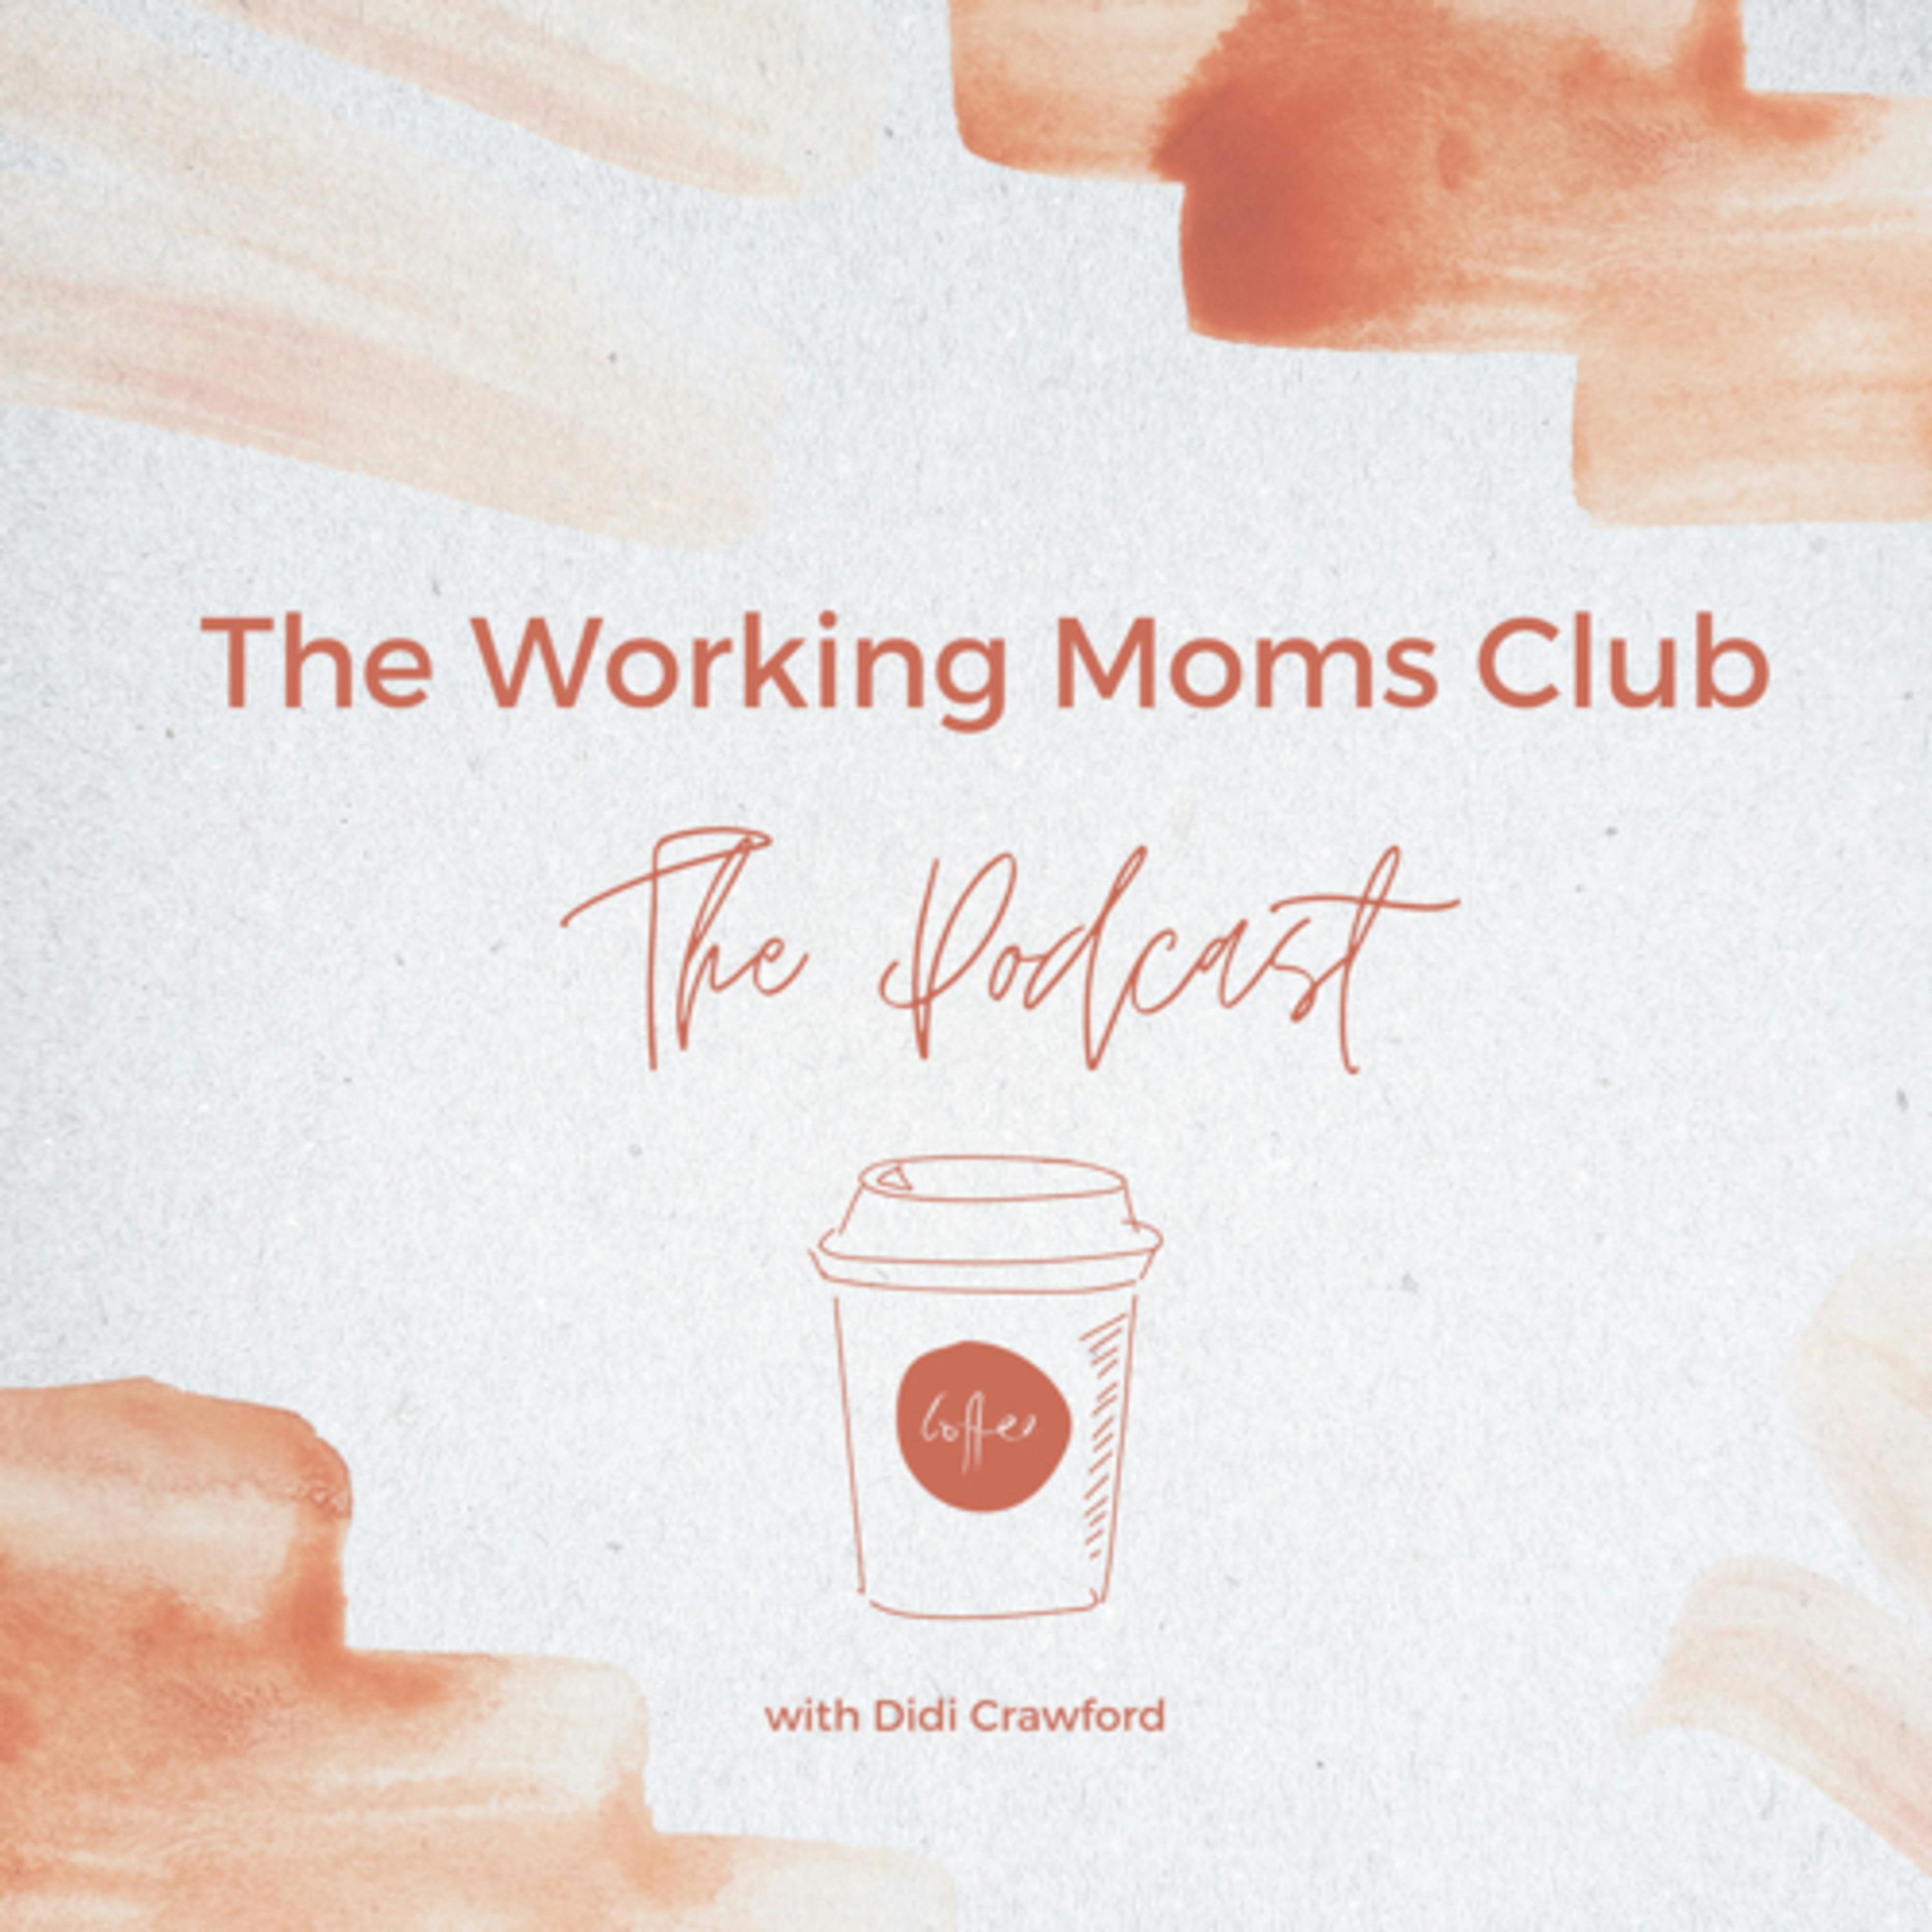 The Working Moms Club (Trailer)